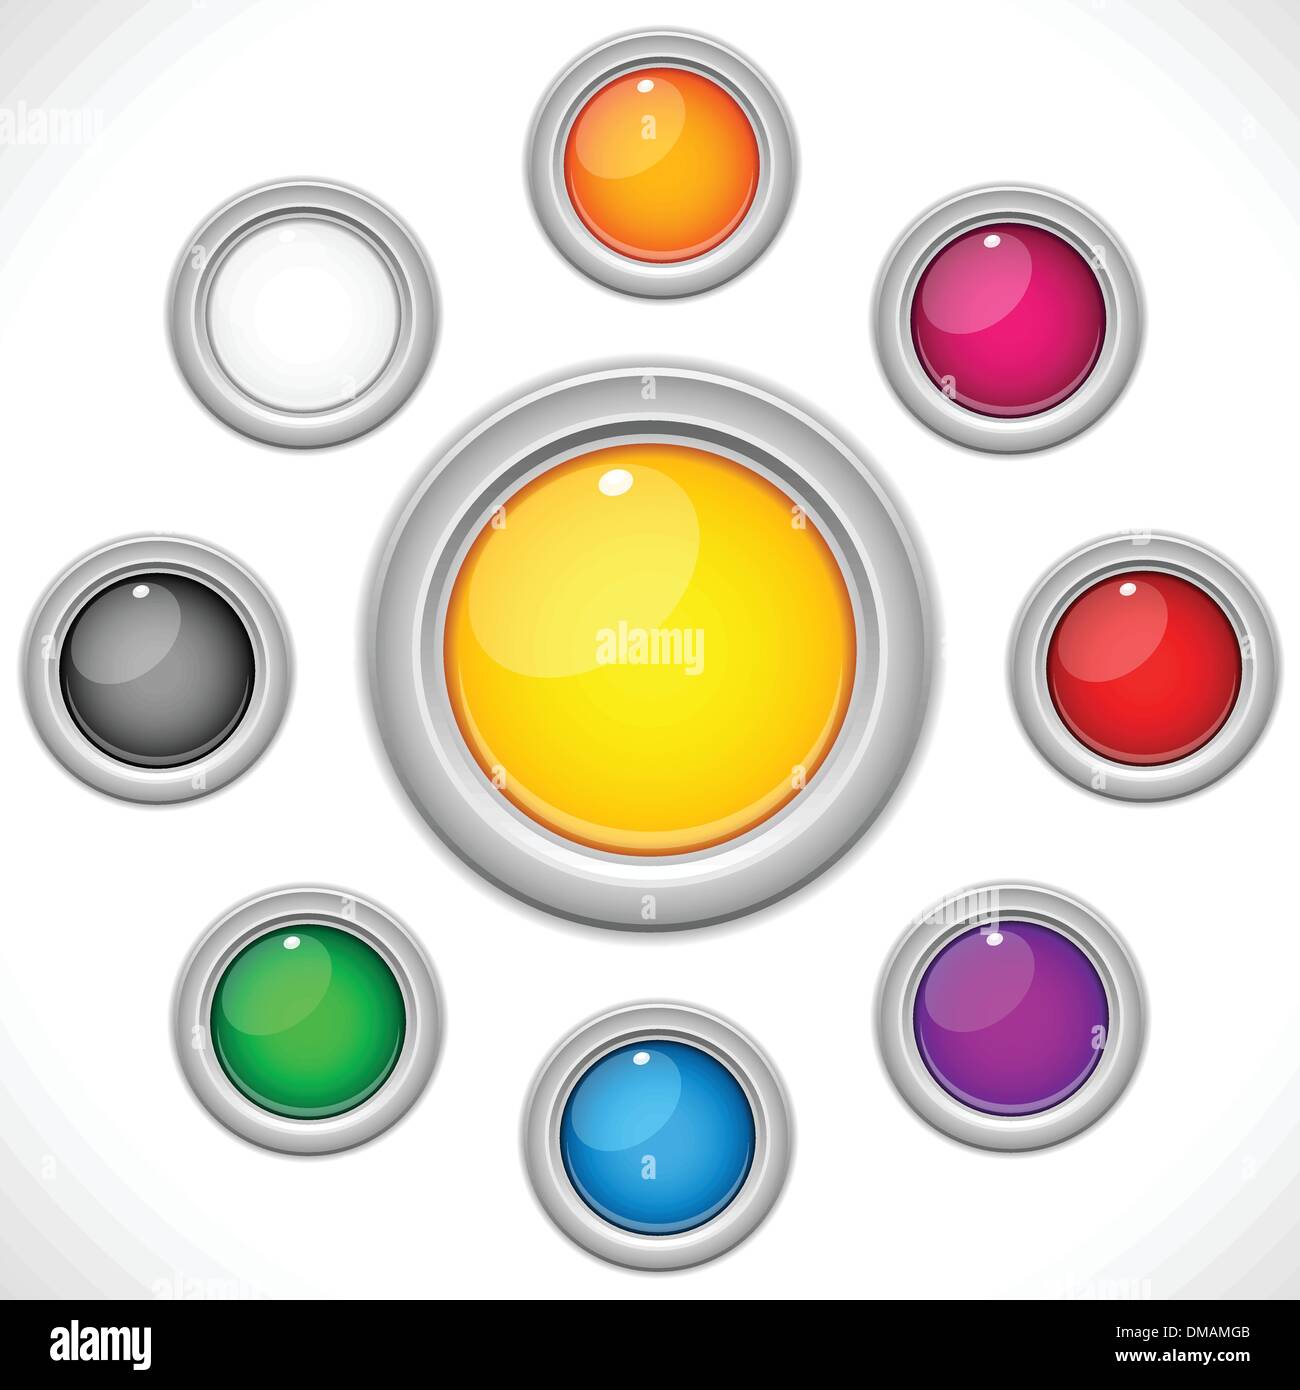 Set of 9 Colorful Glossy Buttons Stock Vector